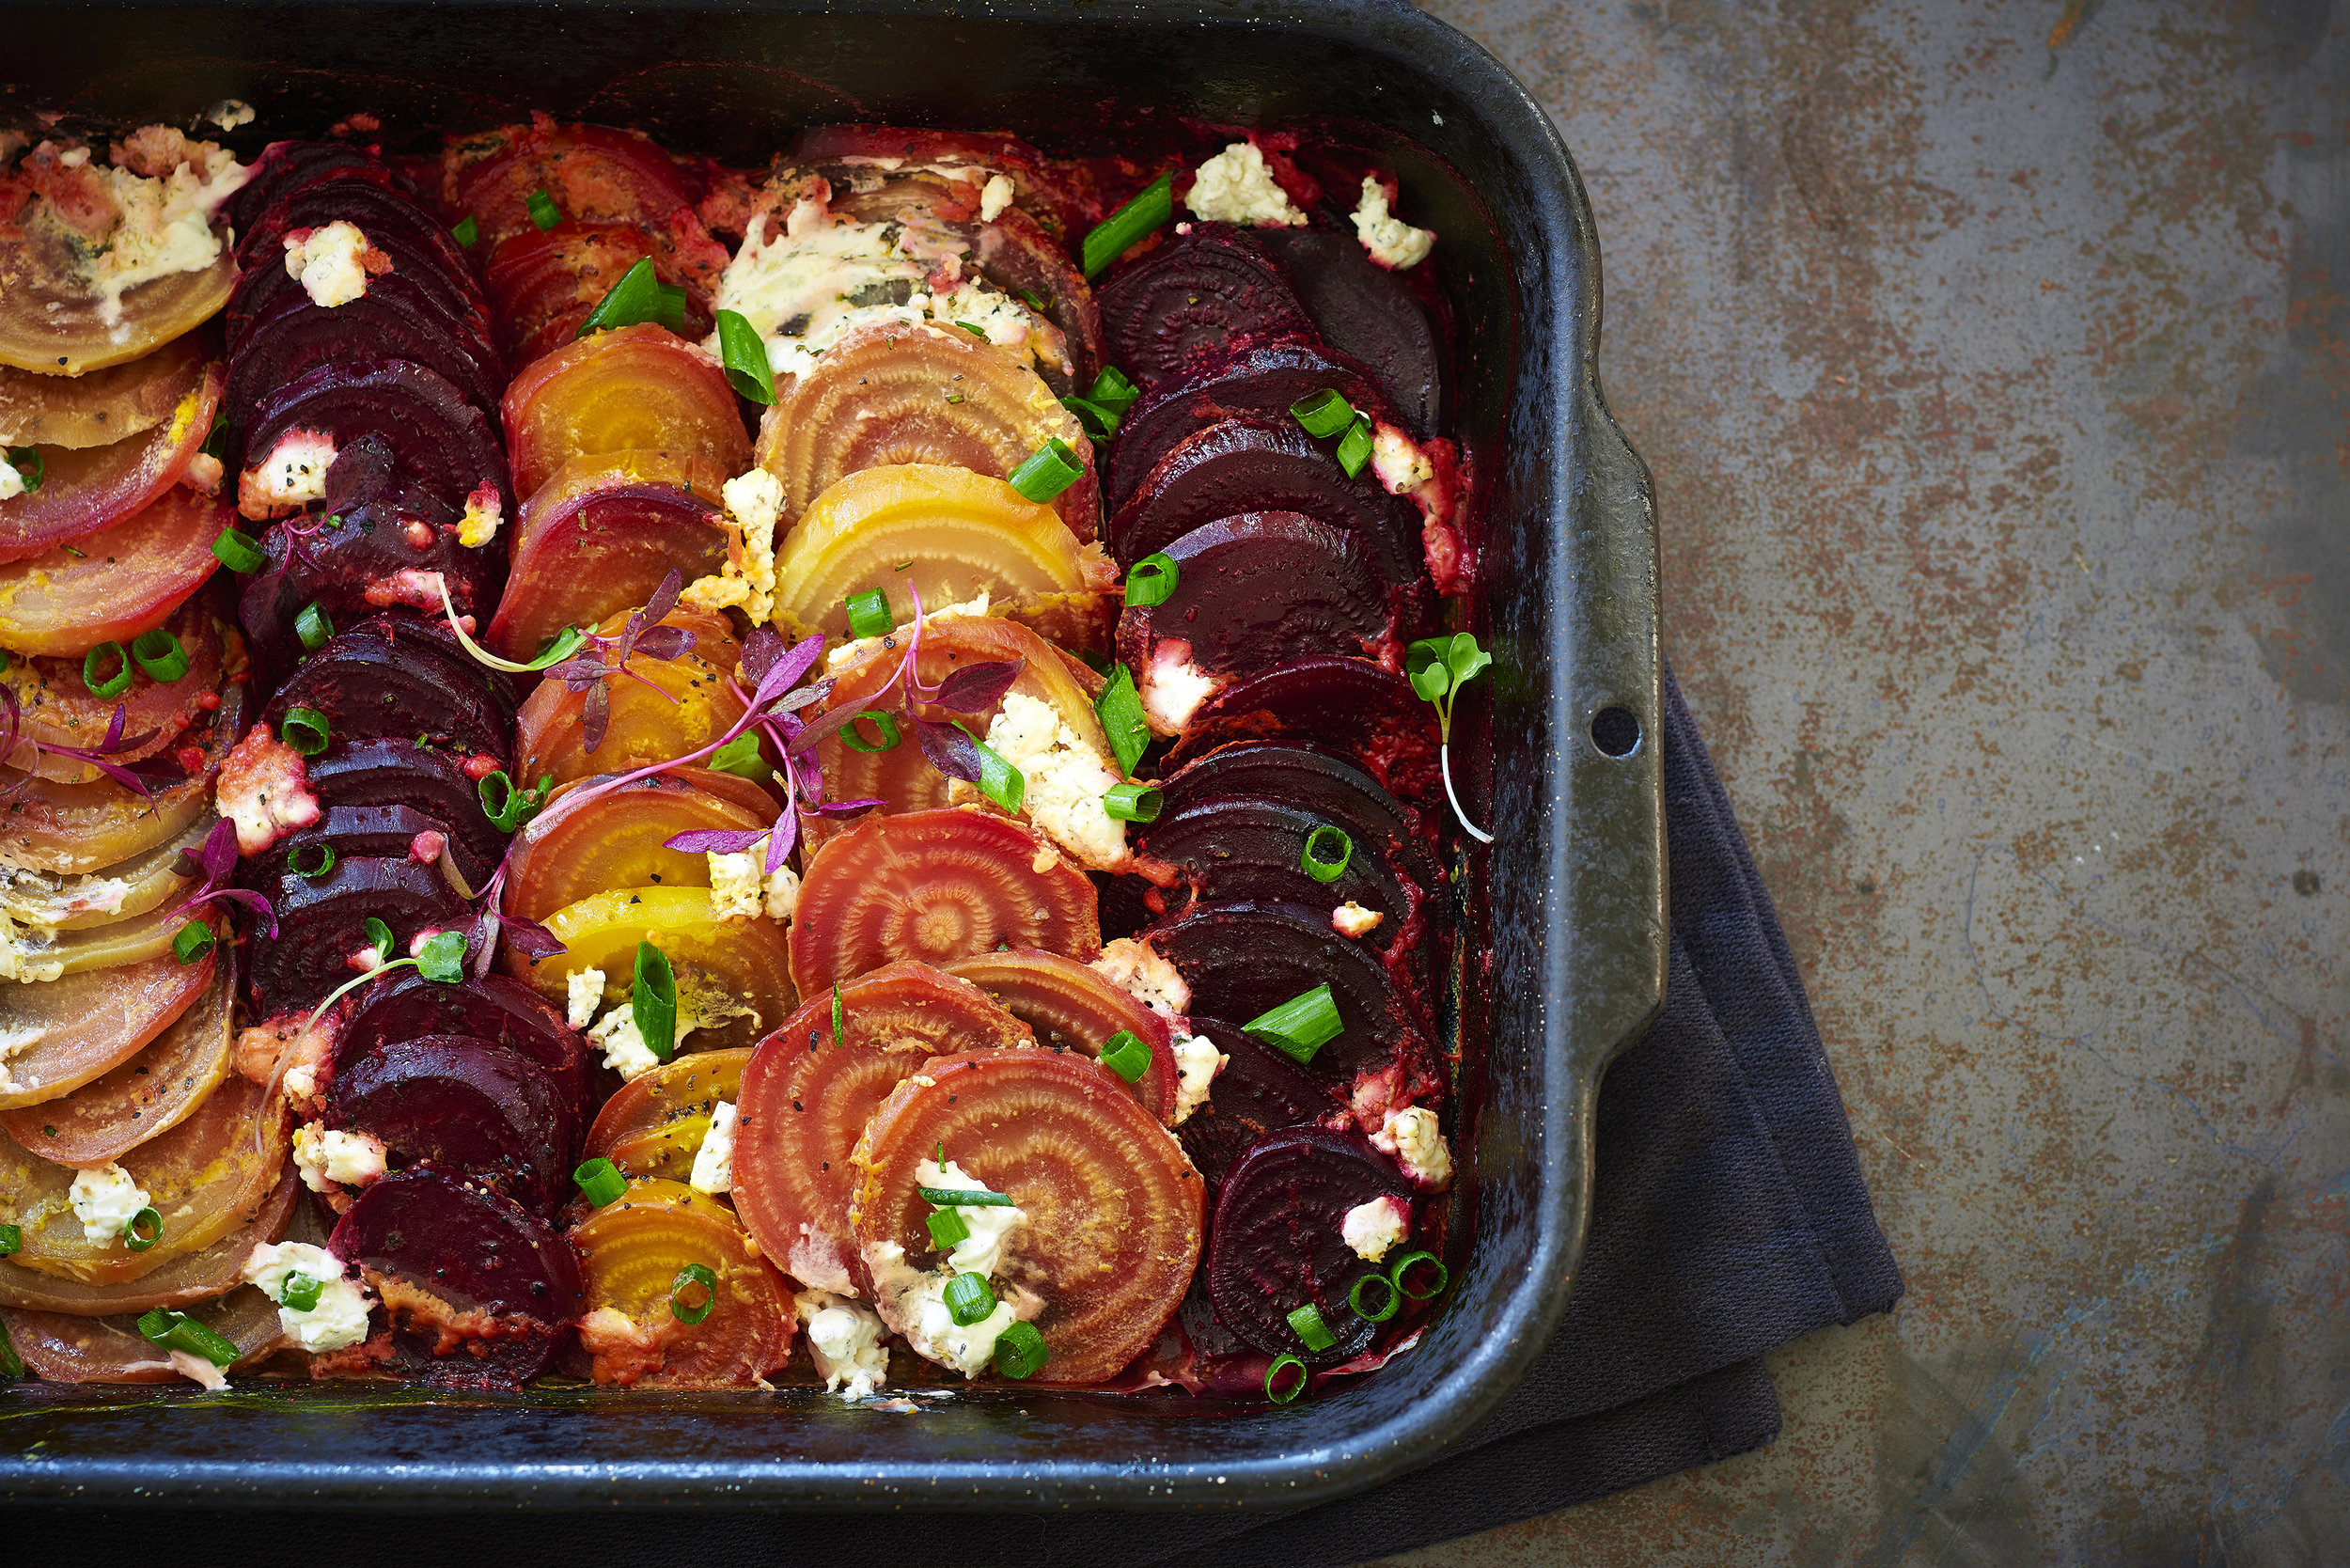 Roasted Beets with Feta Cheese